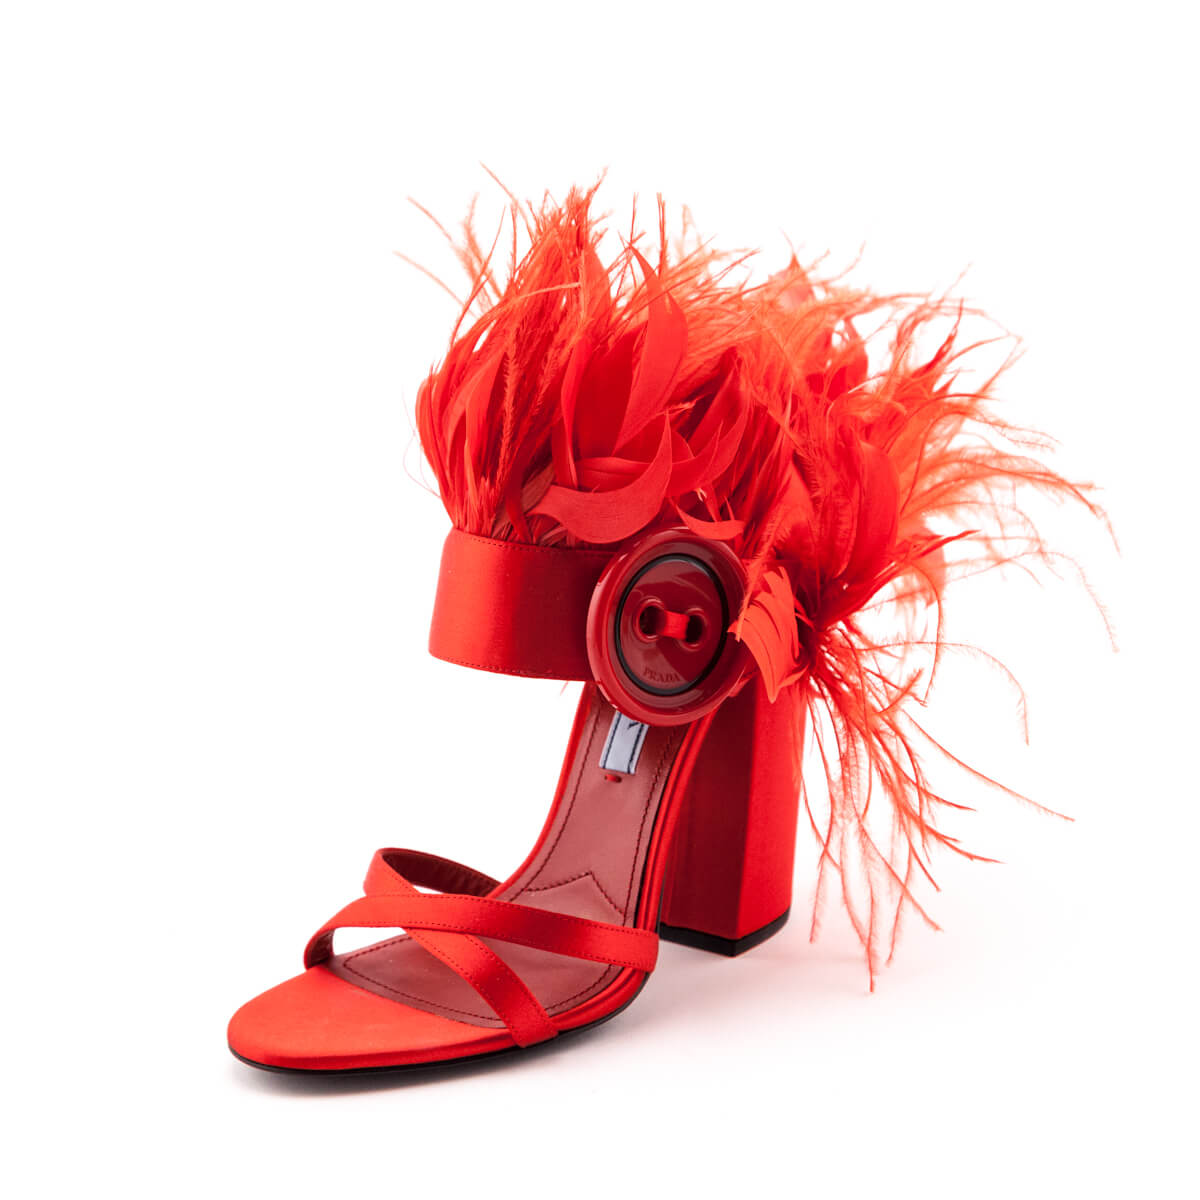 Prada Red Satin Feather Embellished Sandals Size US 6 | EU 36 - Love that Bag etc - Preowned Authentic Designer Handbags & Preloved Fashions